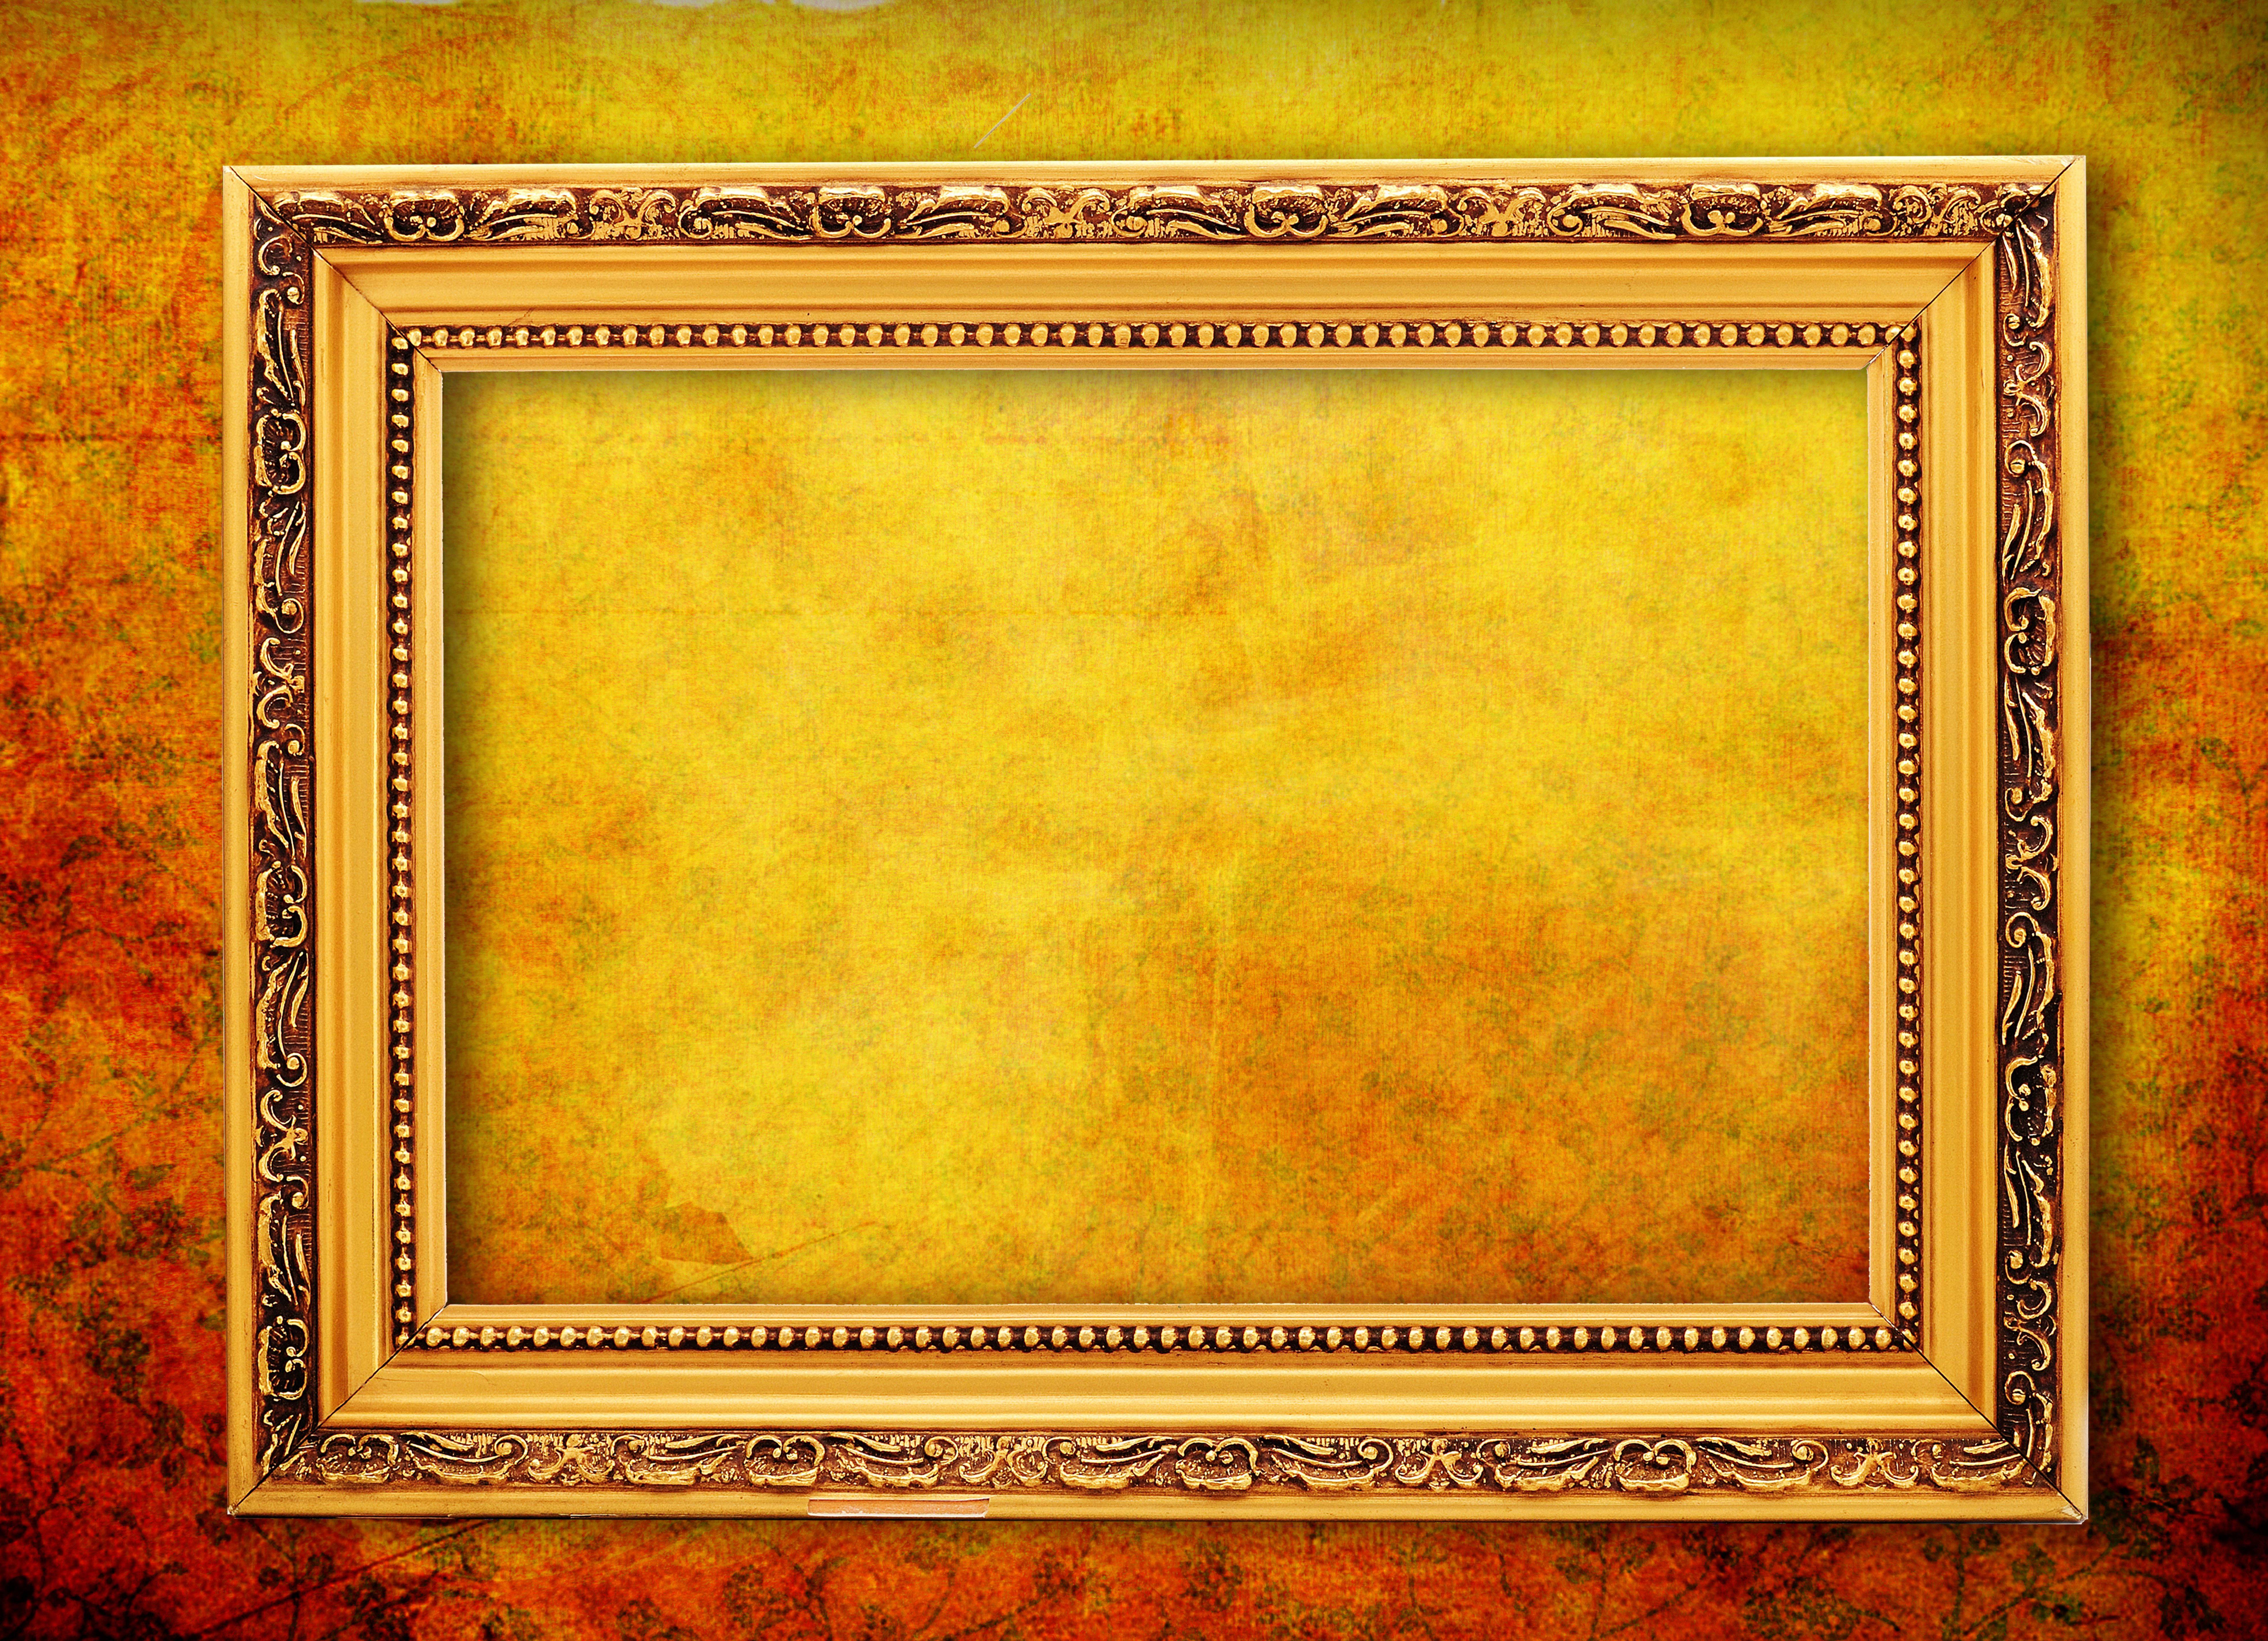 Free Download Frame Texture Wallpapers Hd Backgrounds